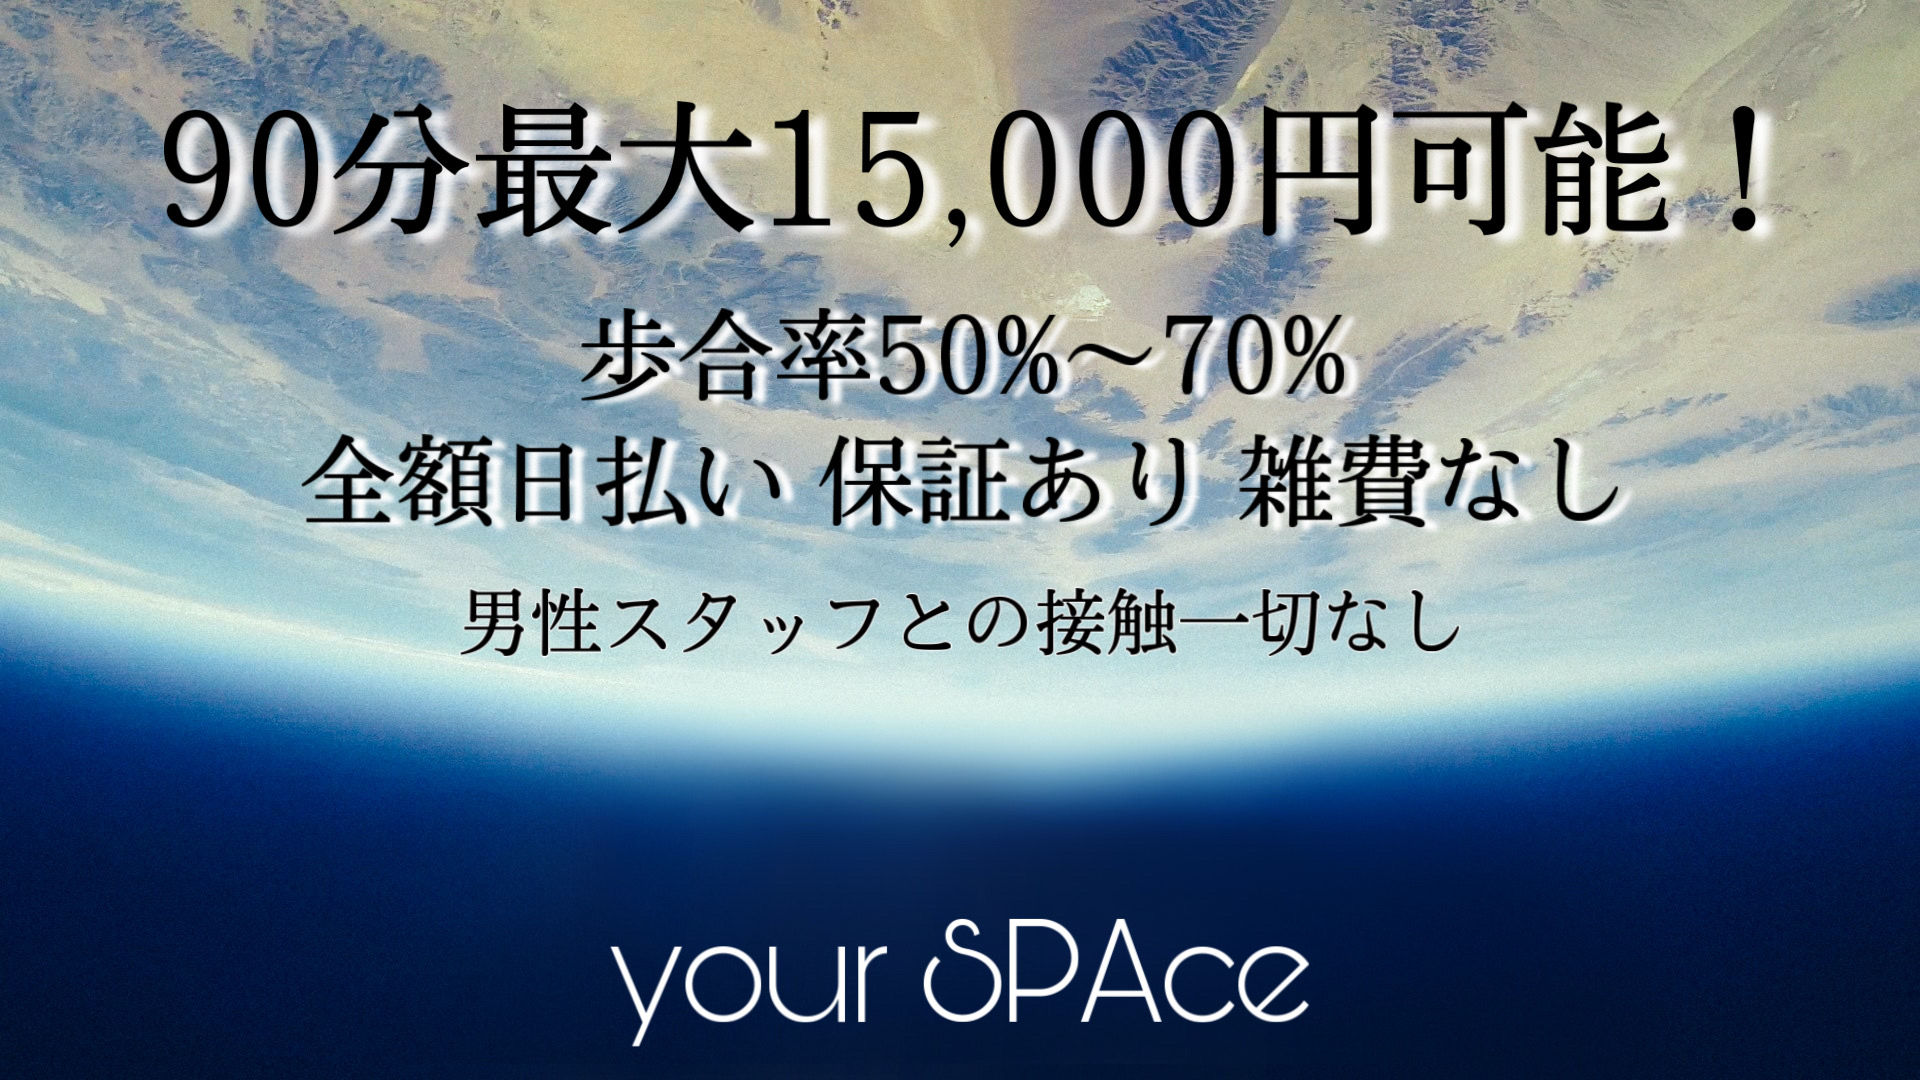 yourSPAce（ユアスペース）の「その他」画像1枚目